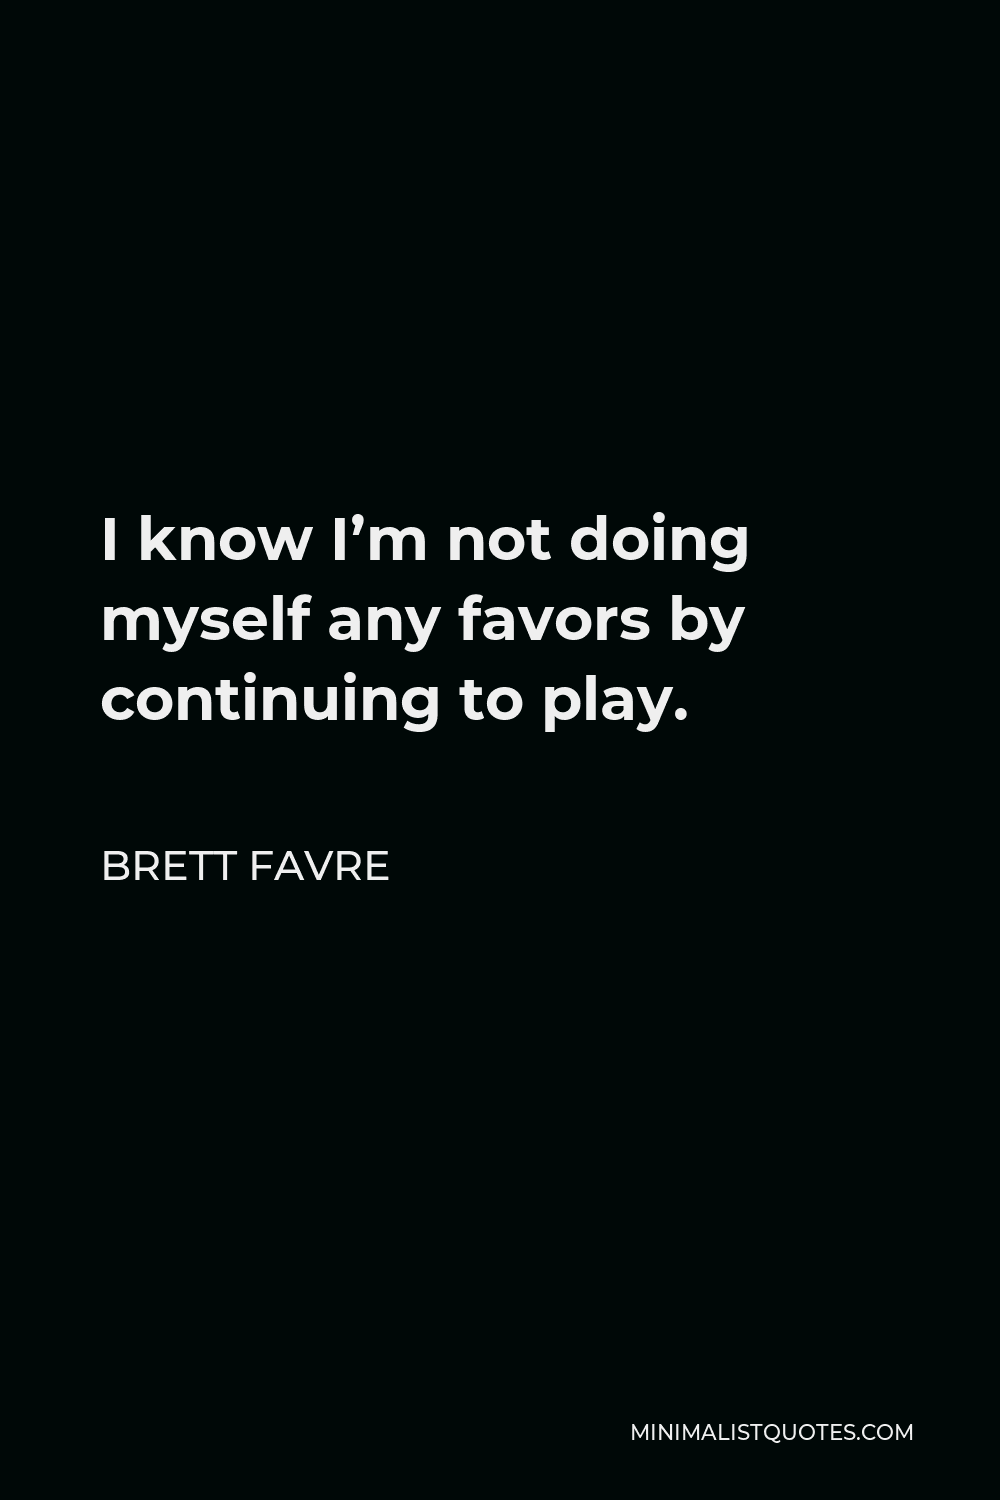 Brett Favre Quote - I know I’m not doing myself any favors by continuing to play.